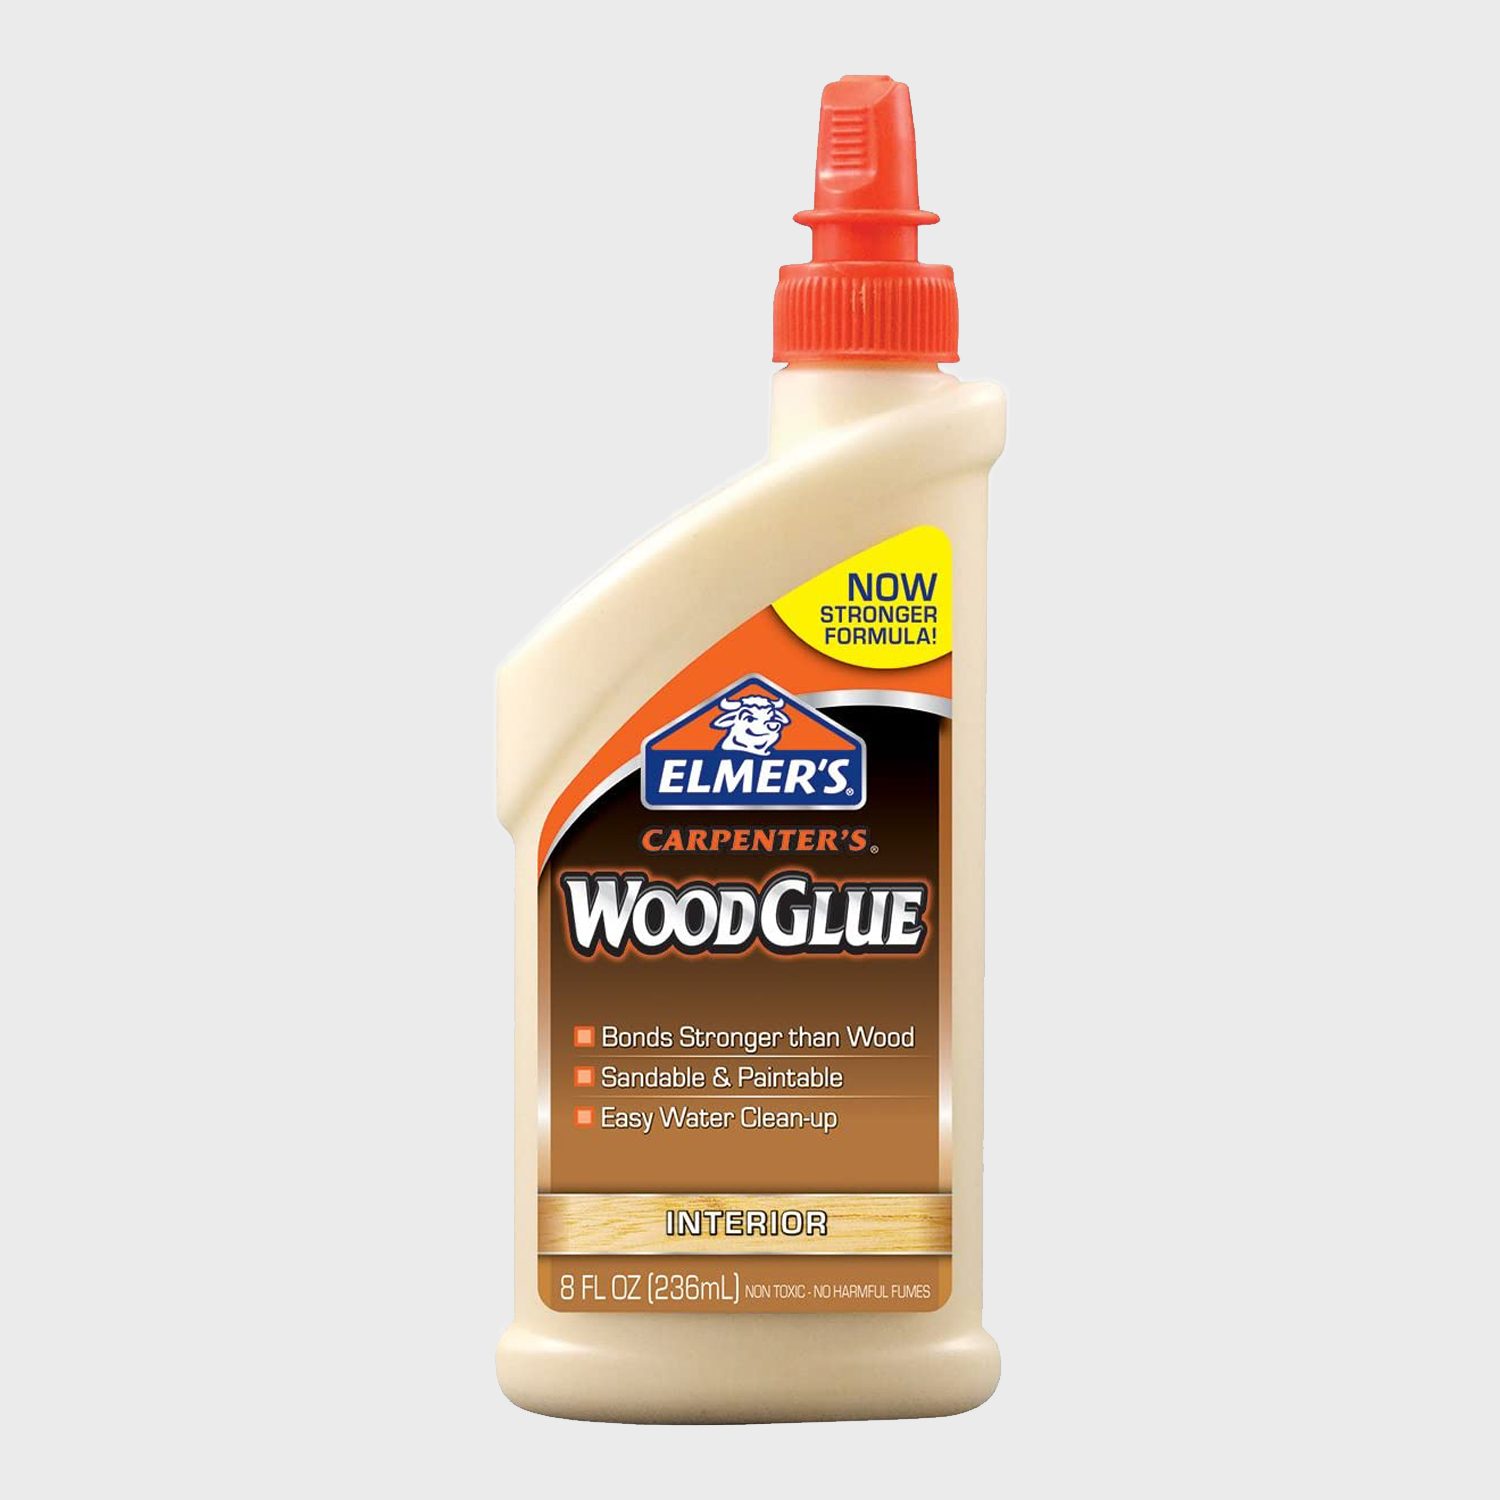 Testing construction adhesives as woodworking glue 